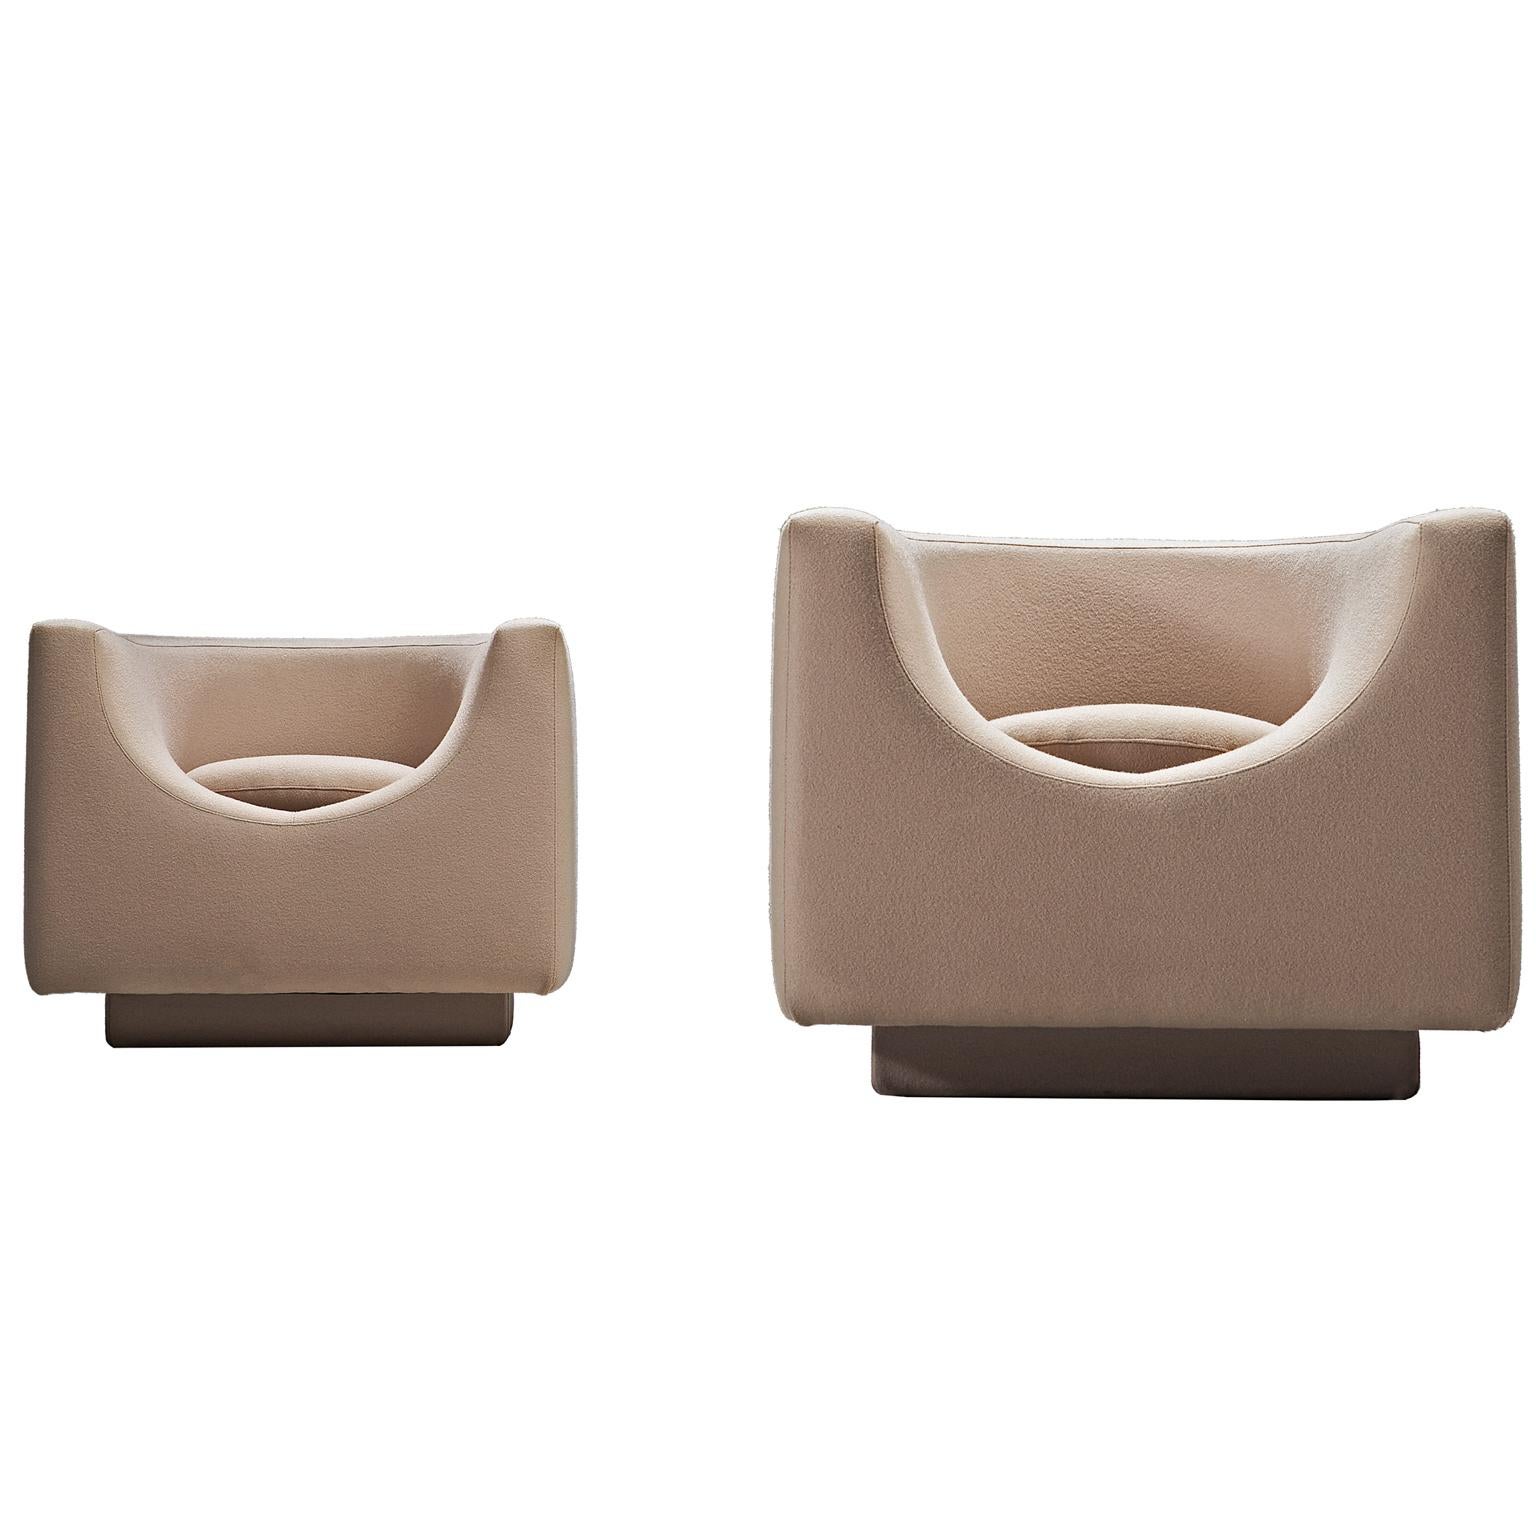 Saporiti Lounge Chairs with Warm Beige Upholstery